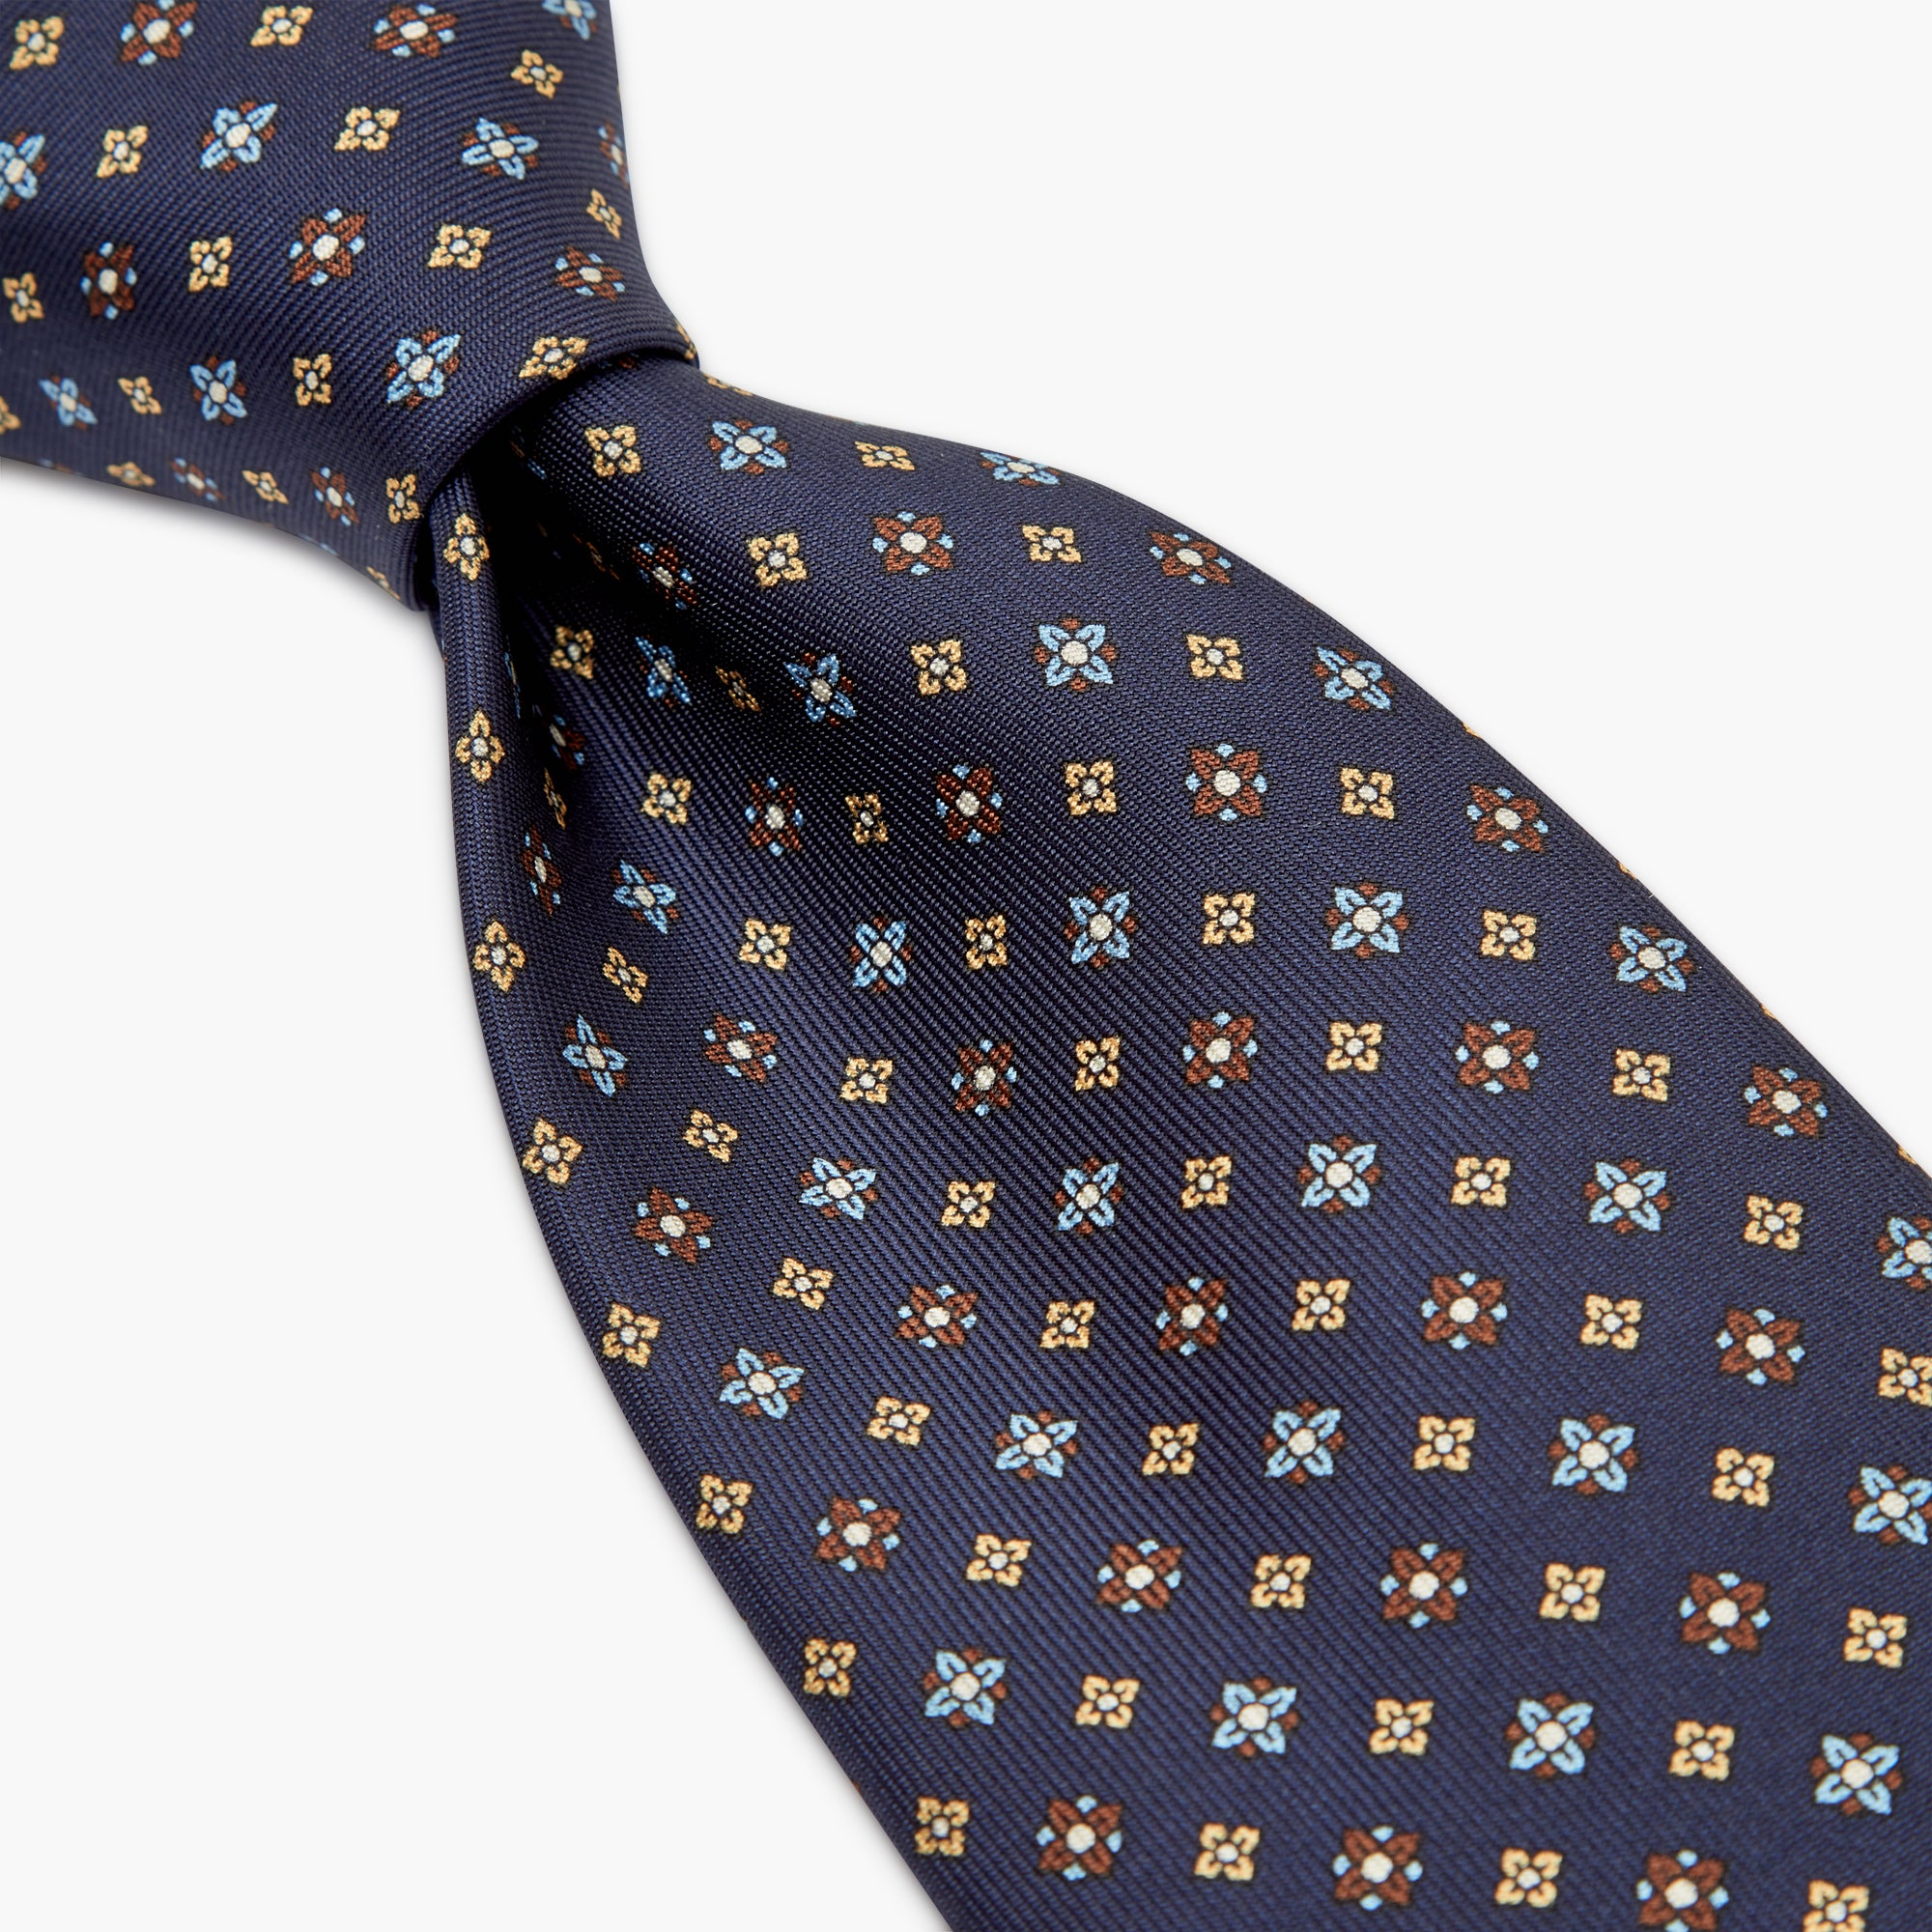 7-Fold Floral Printed English Silk Tie - Blue Yellow